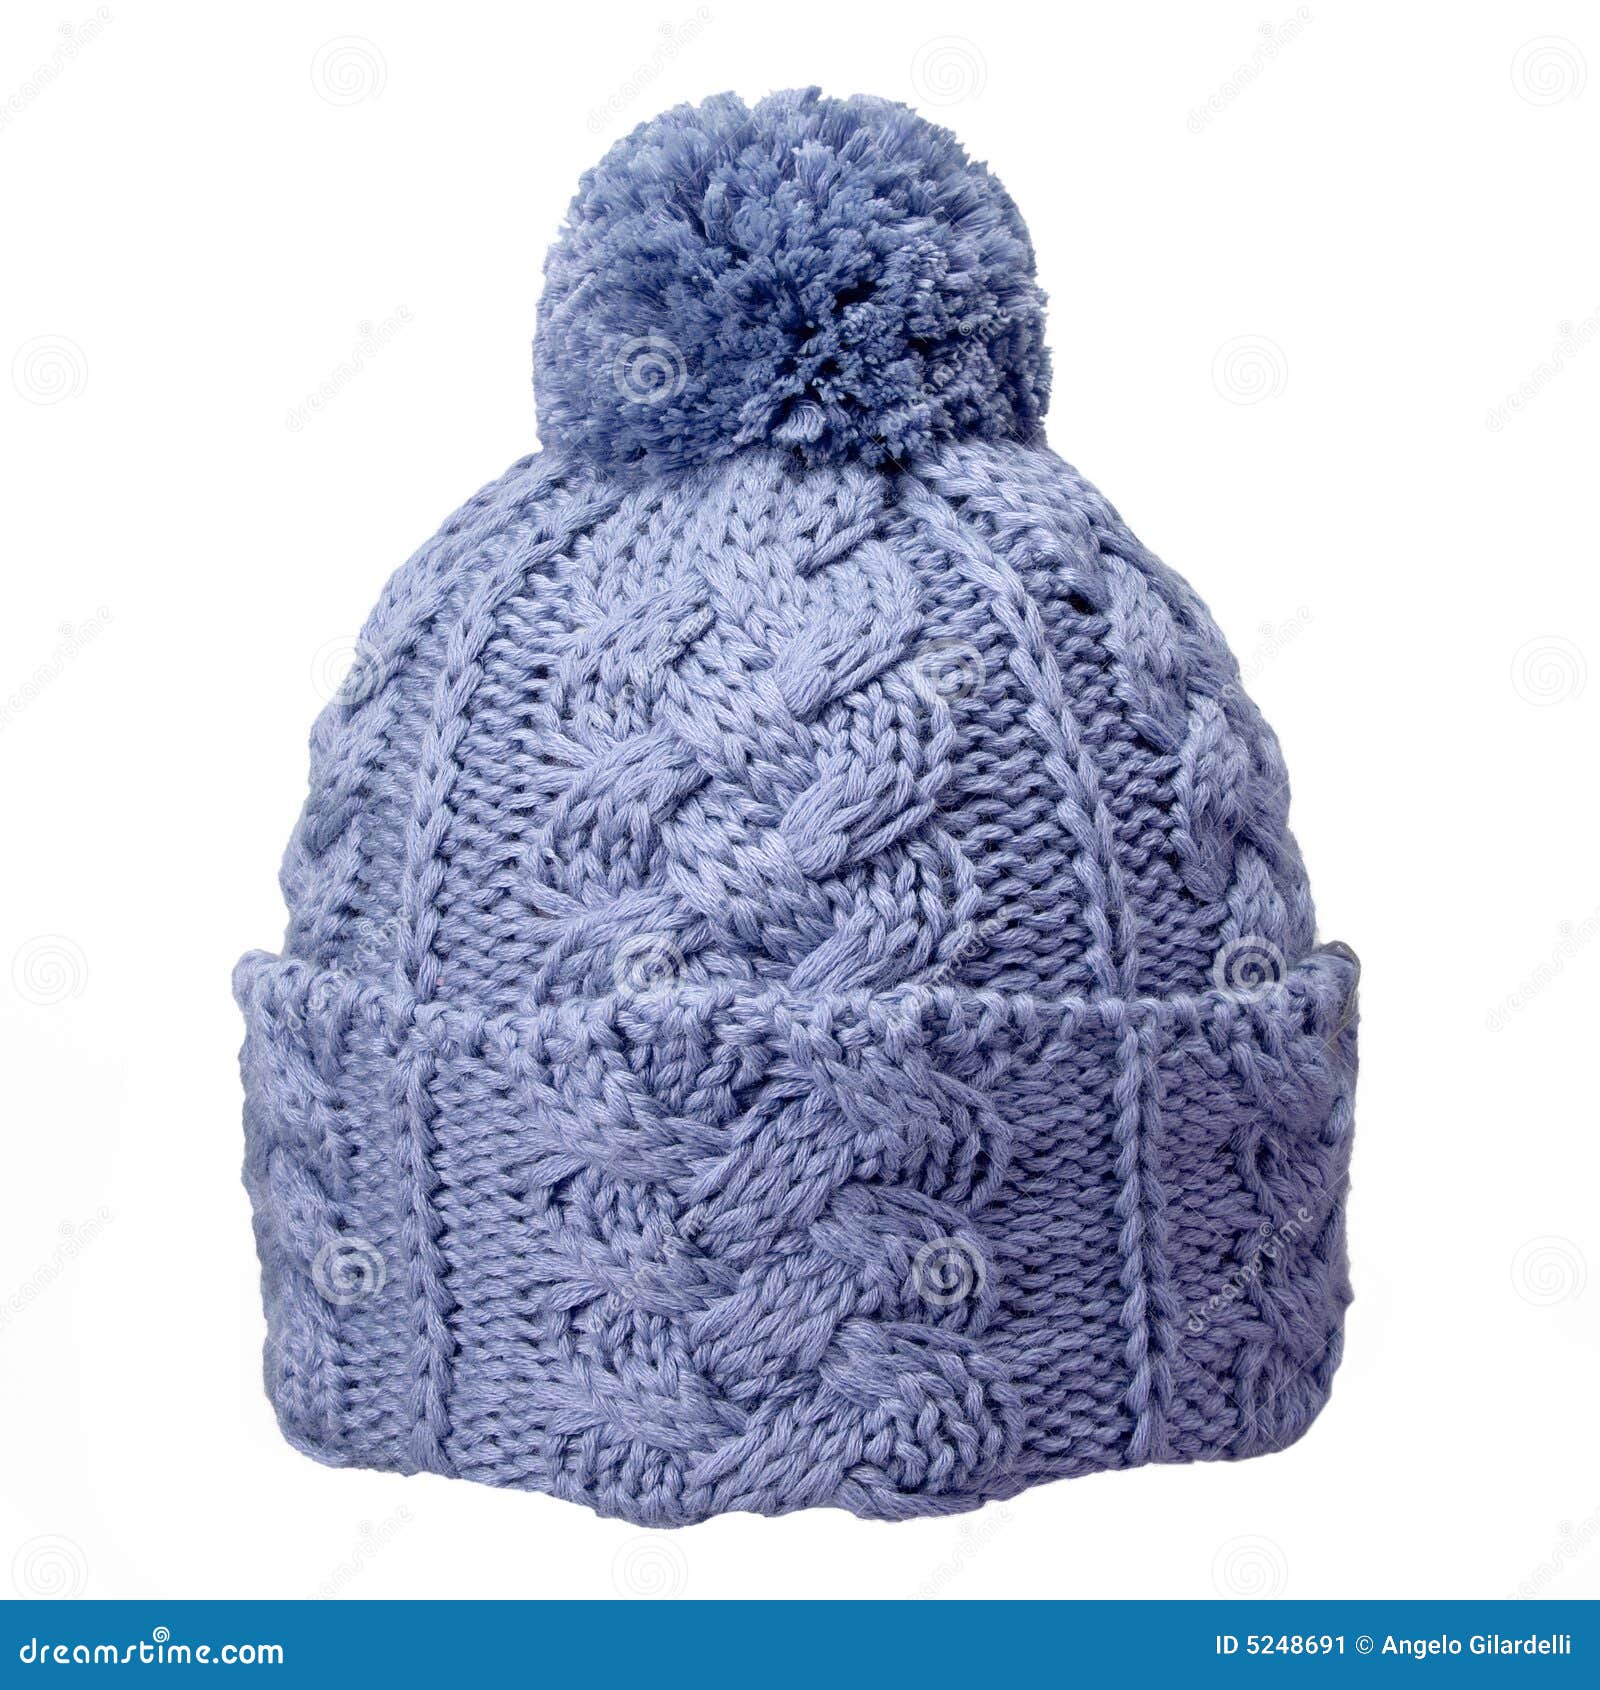 Woolen hat stock image. Image of winter, cold, clothing - 5248691